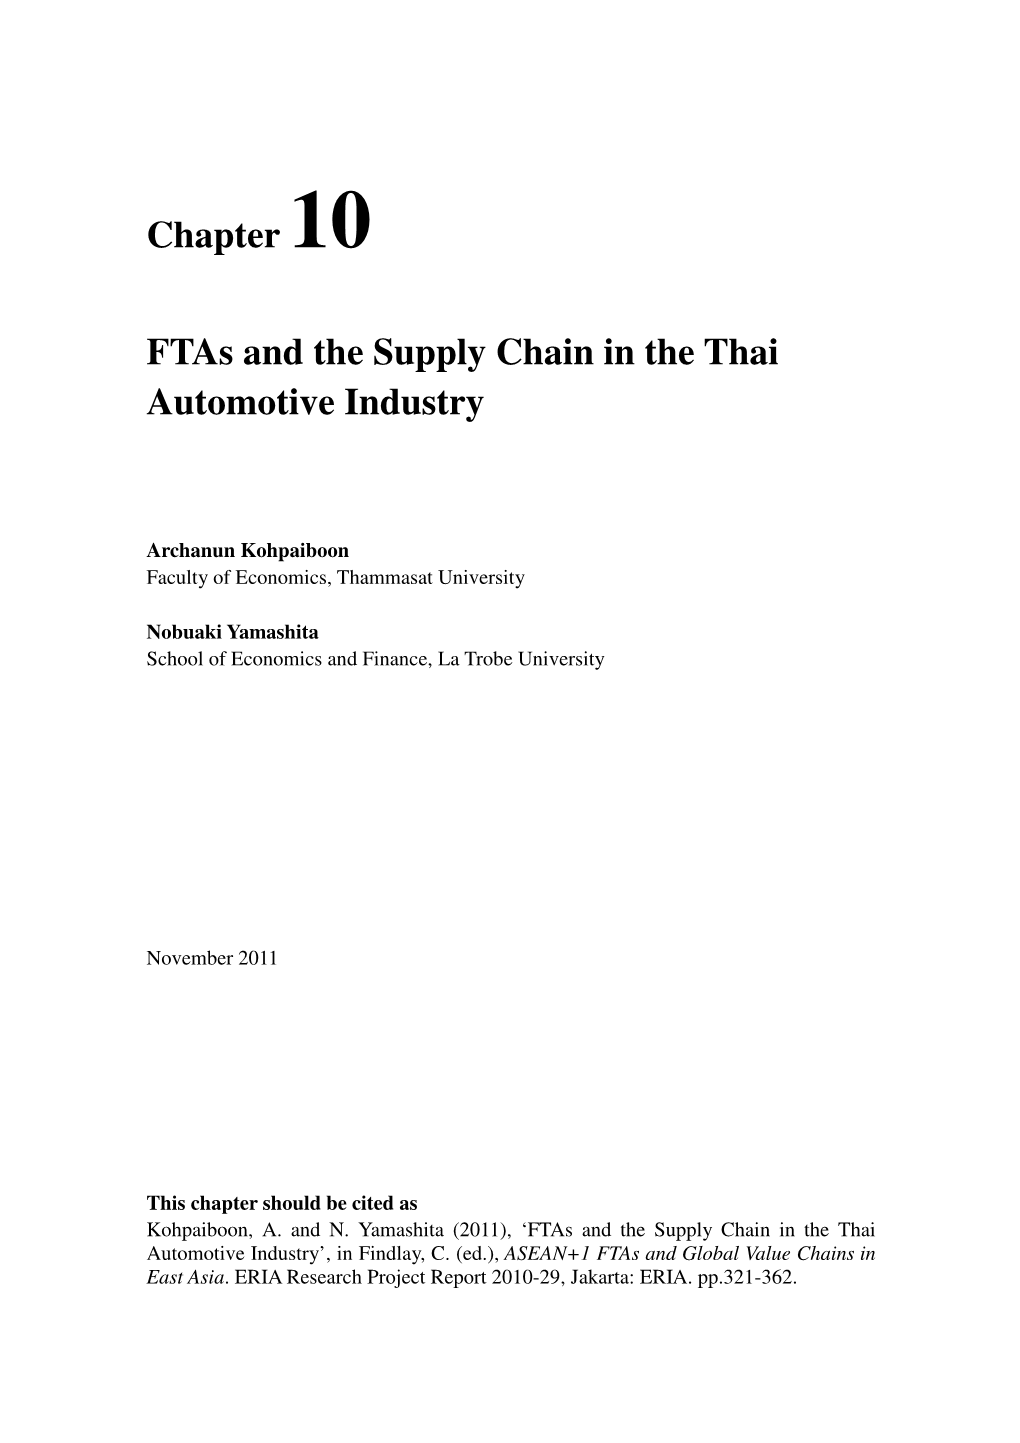 Chapter 10 Ftas and the Supply Chain in the Thai Automotive Industry